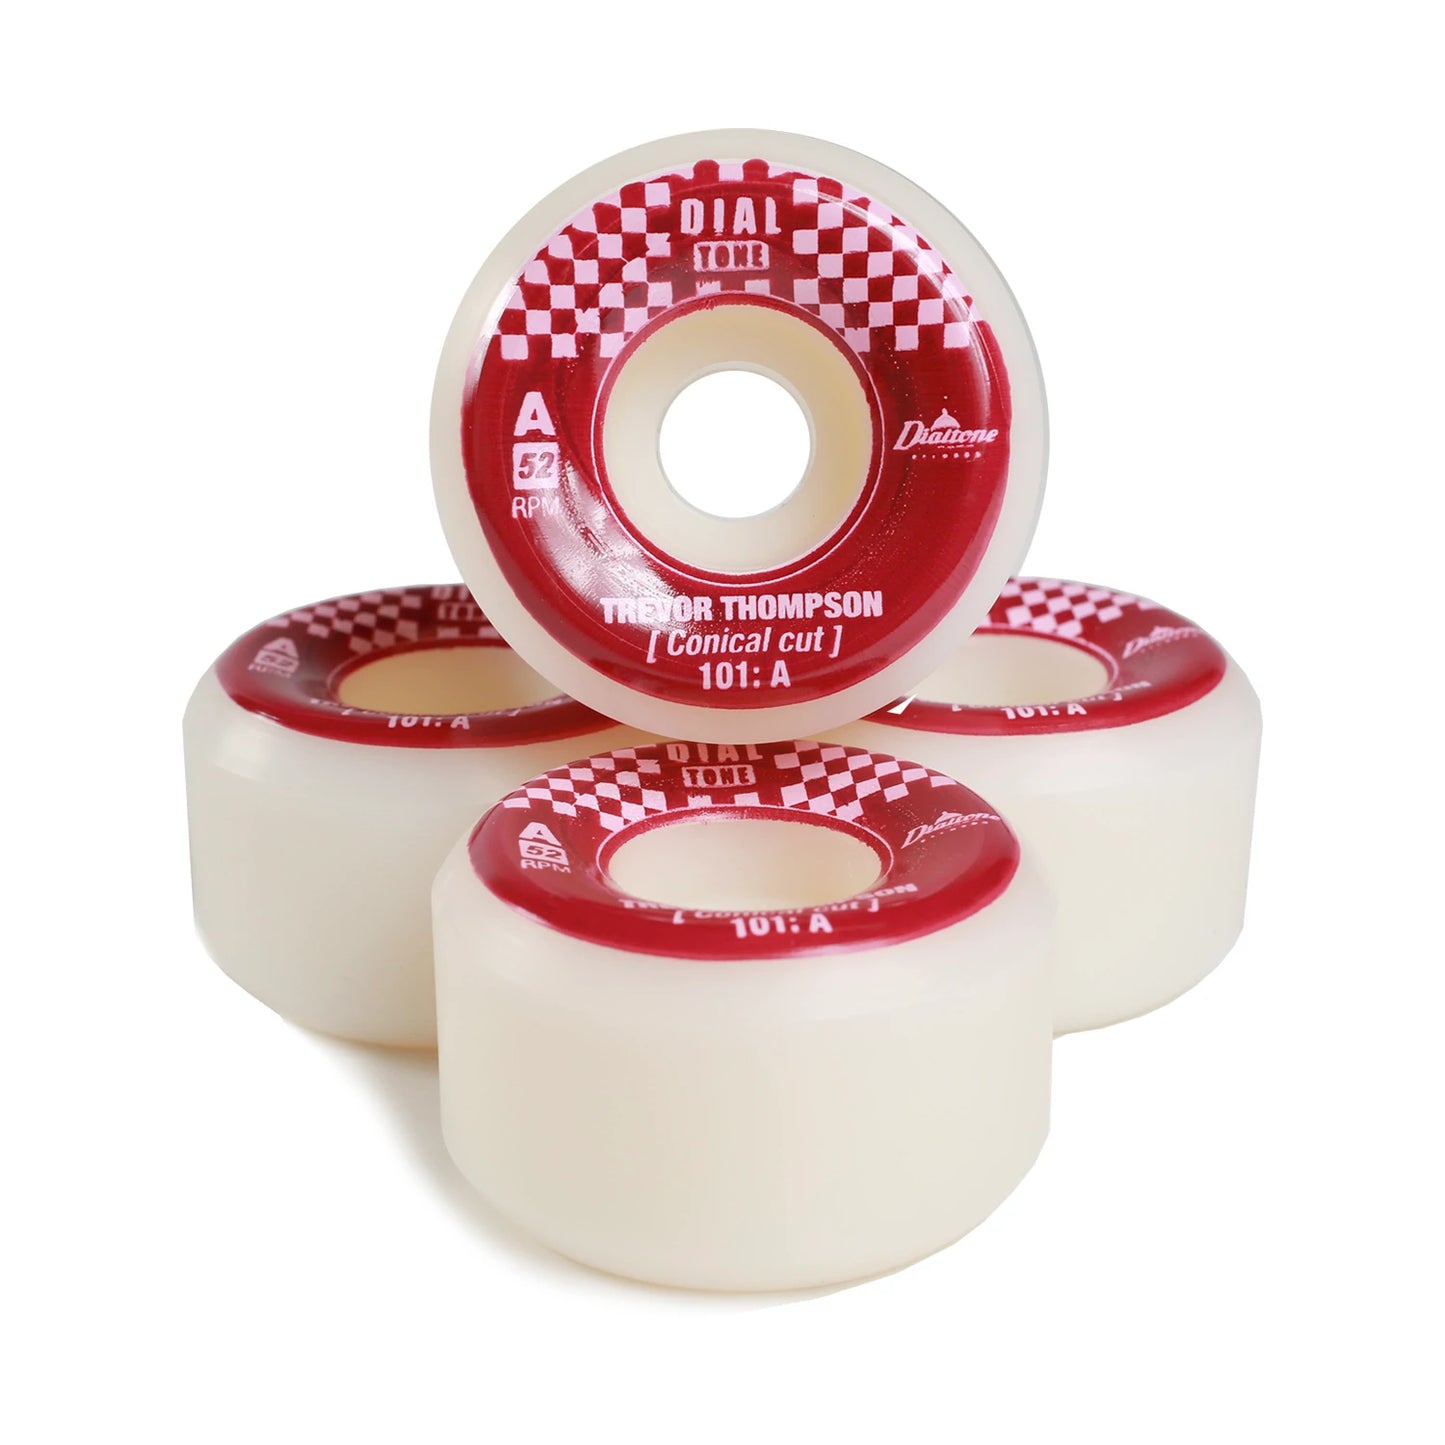 Dial Tone Thompson Capitol Conical 101a 52mm Wheels